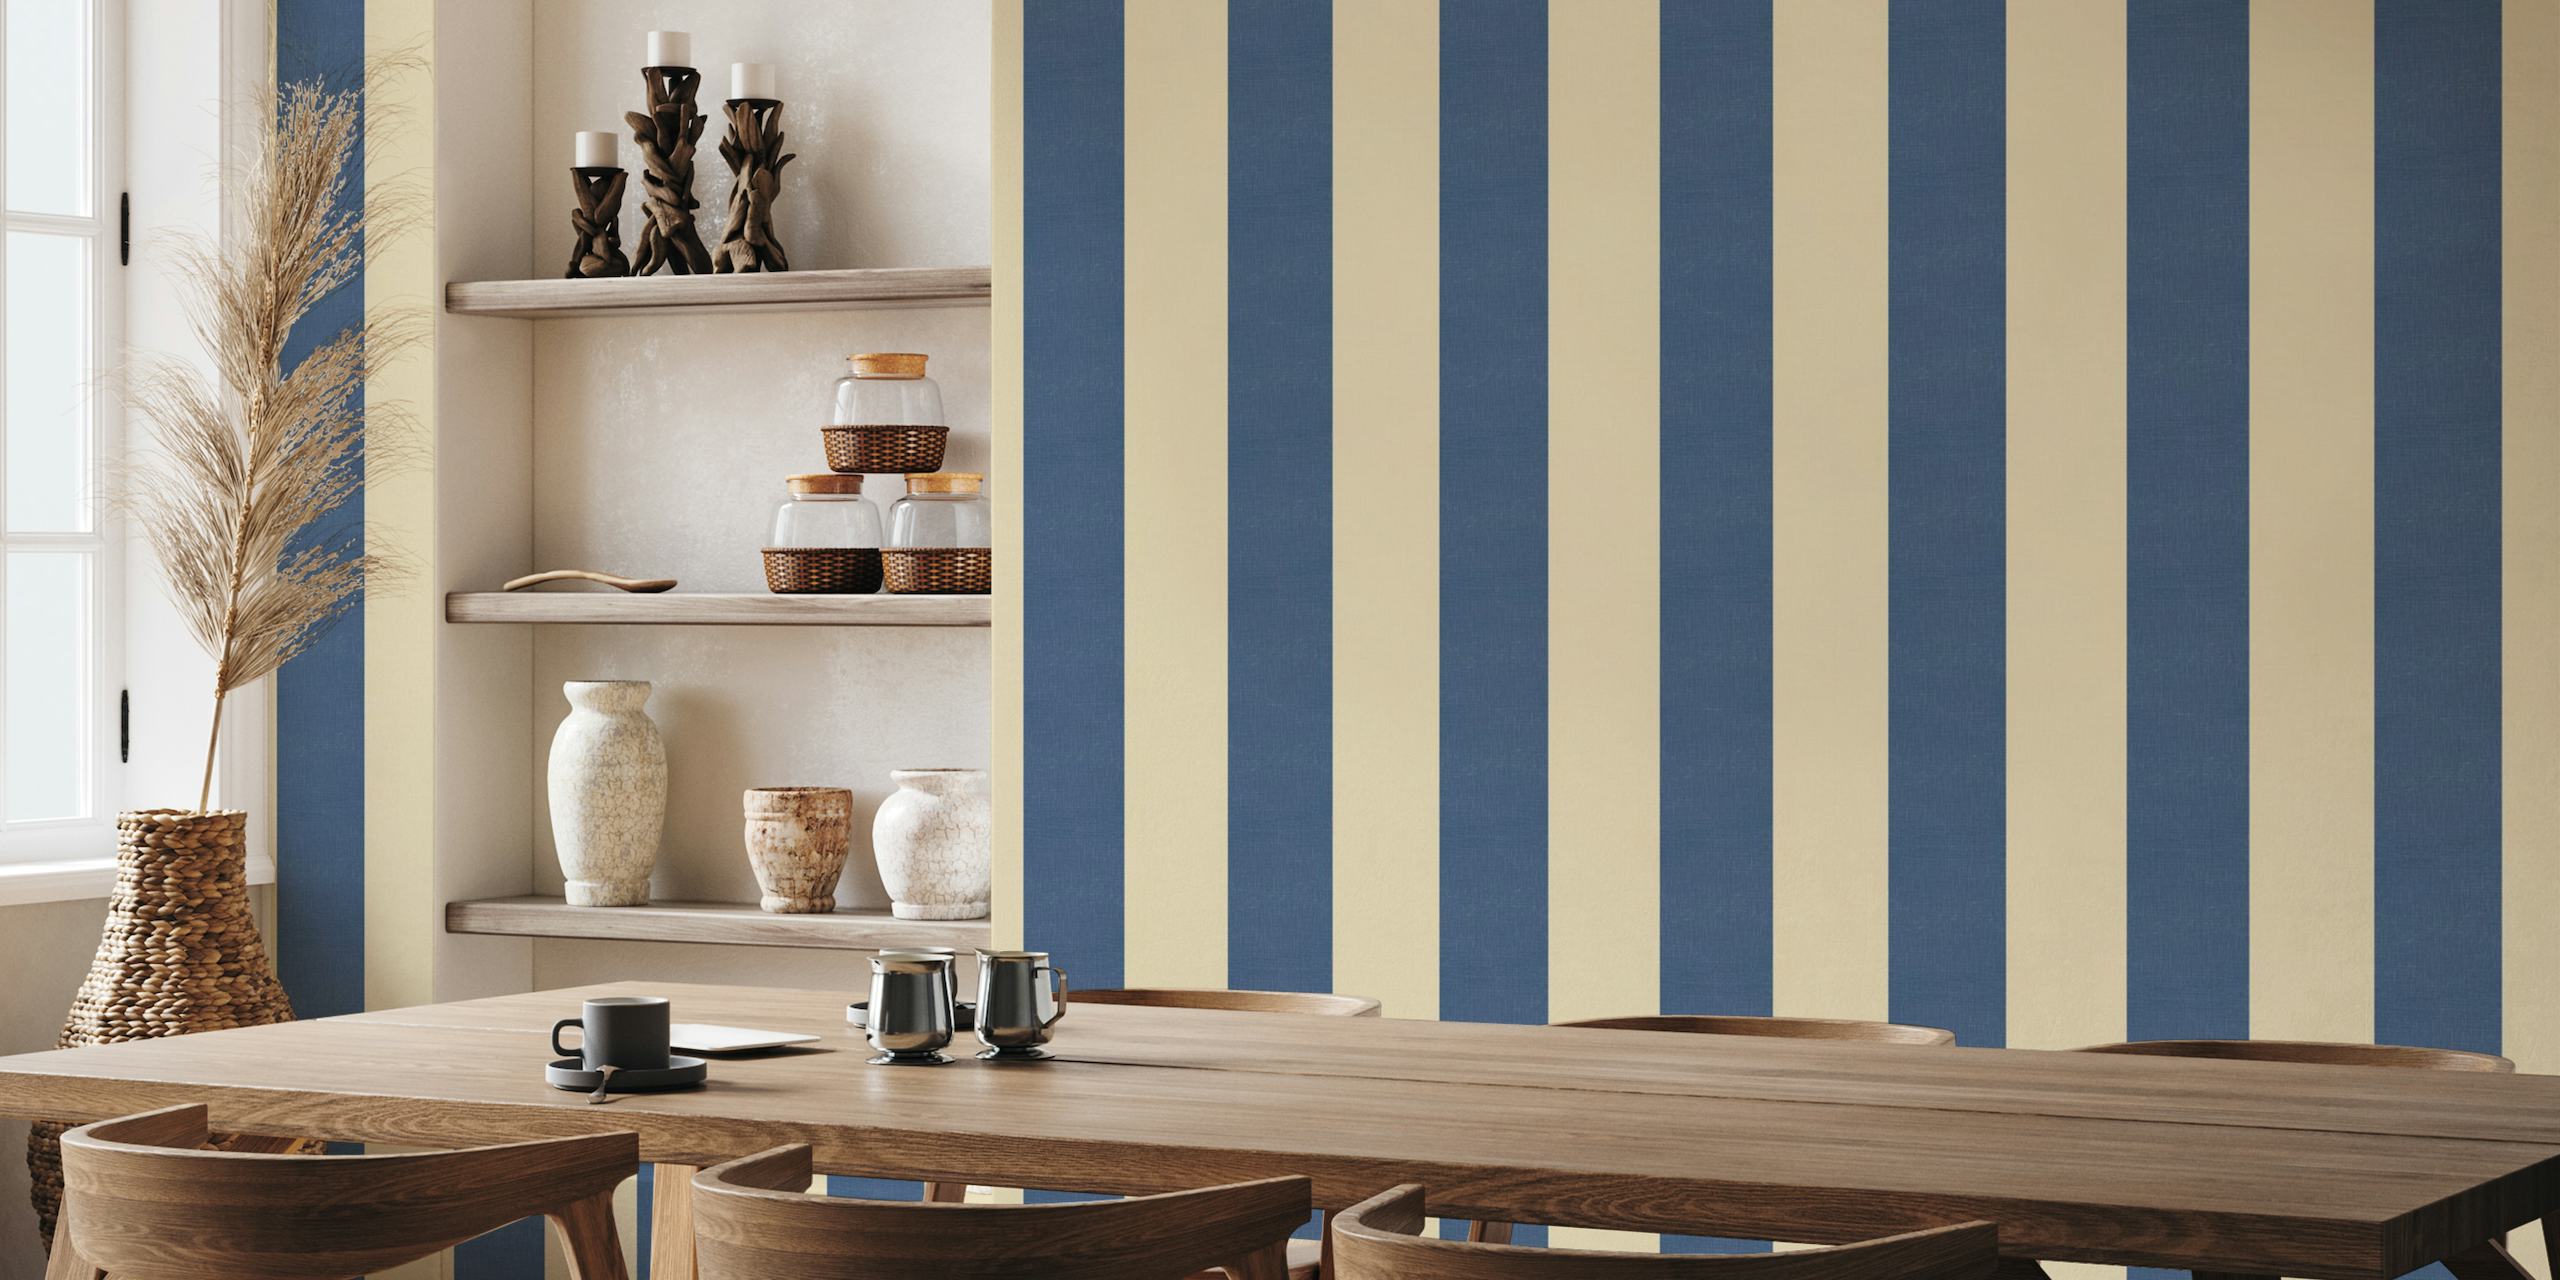 Wide textured stripes - navy blue and beige tapetit